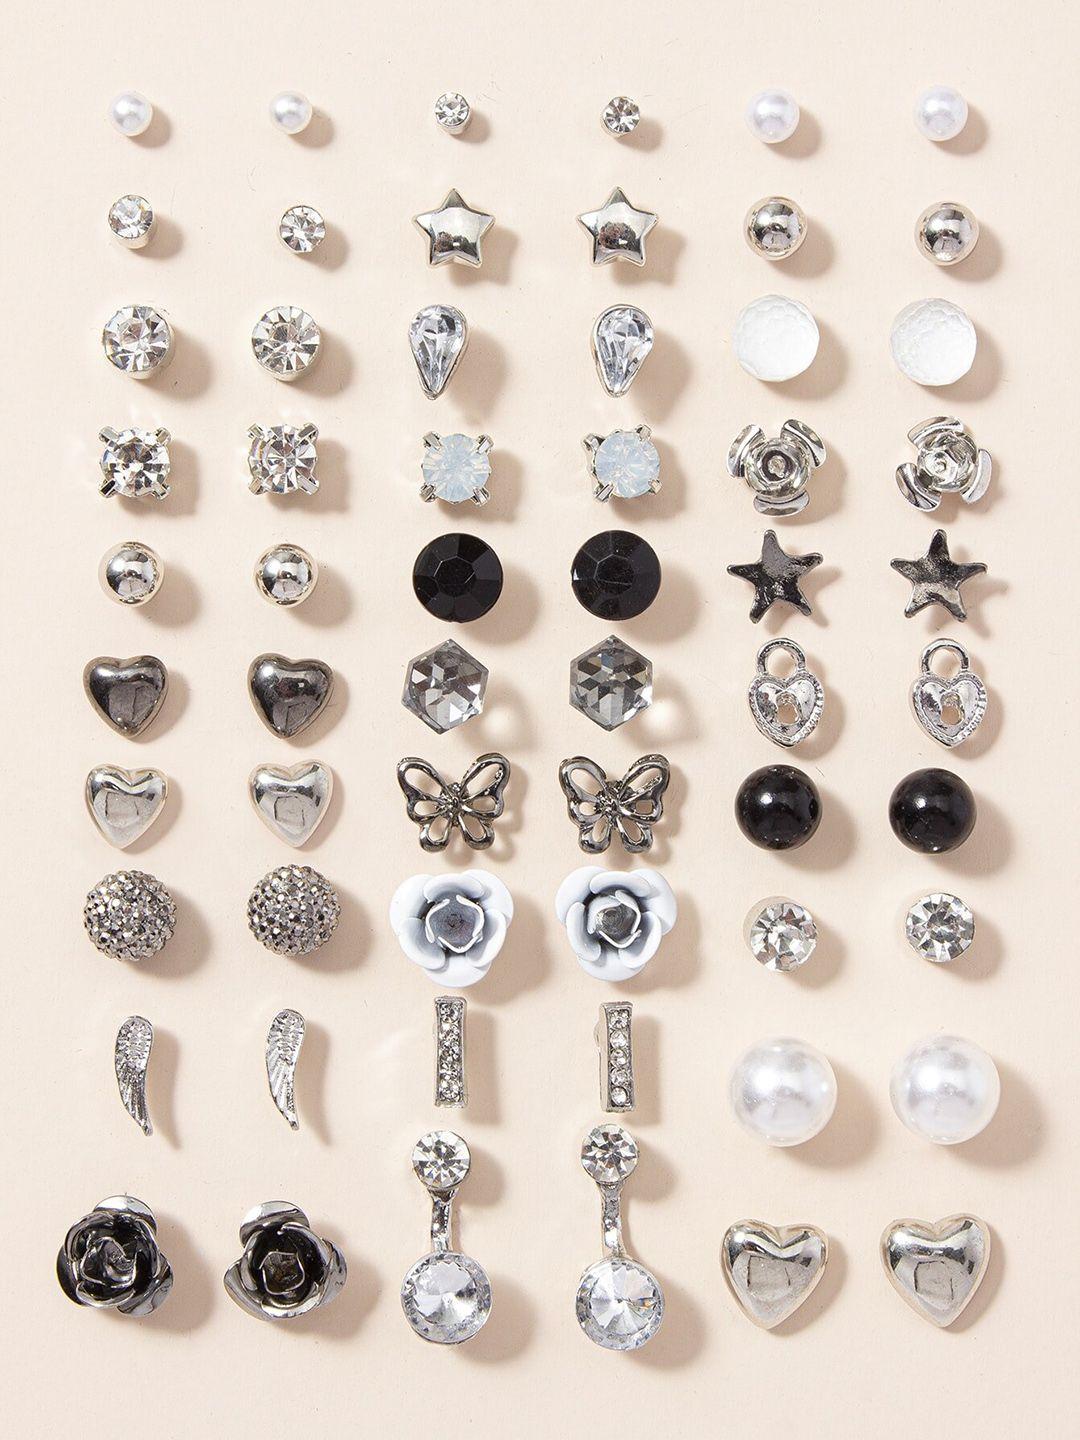 Shining Diva Fashion Set Of 30 Silver-Plated Contemporary Studs Earrings